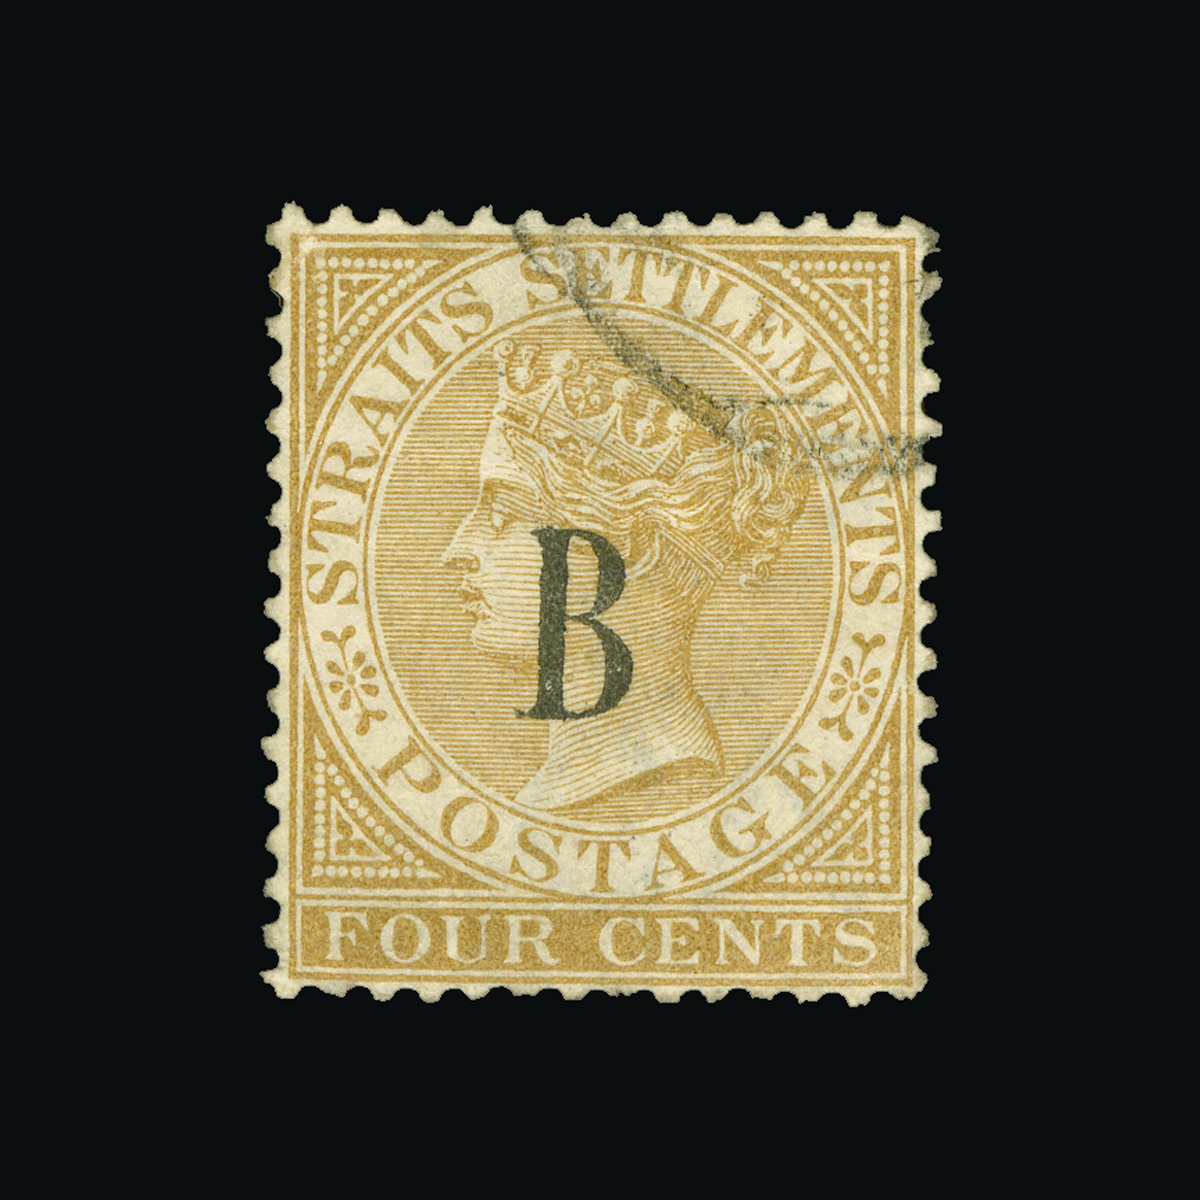 British Post Offices in Siam : (SG 17) 1882-85 CA 4c brown fine used Cat £80 (image available)